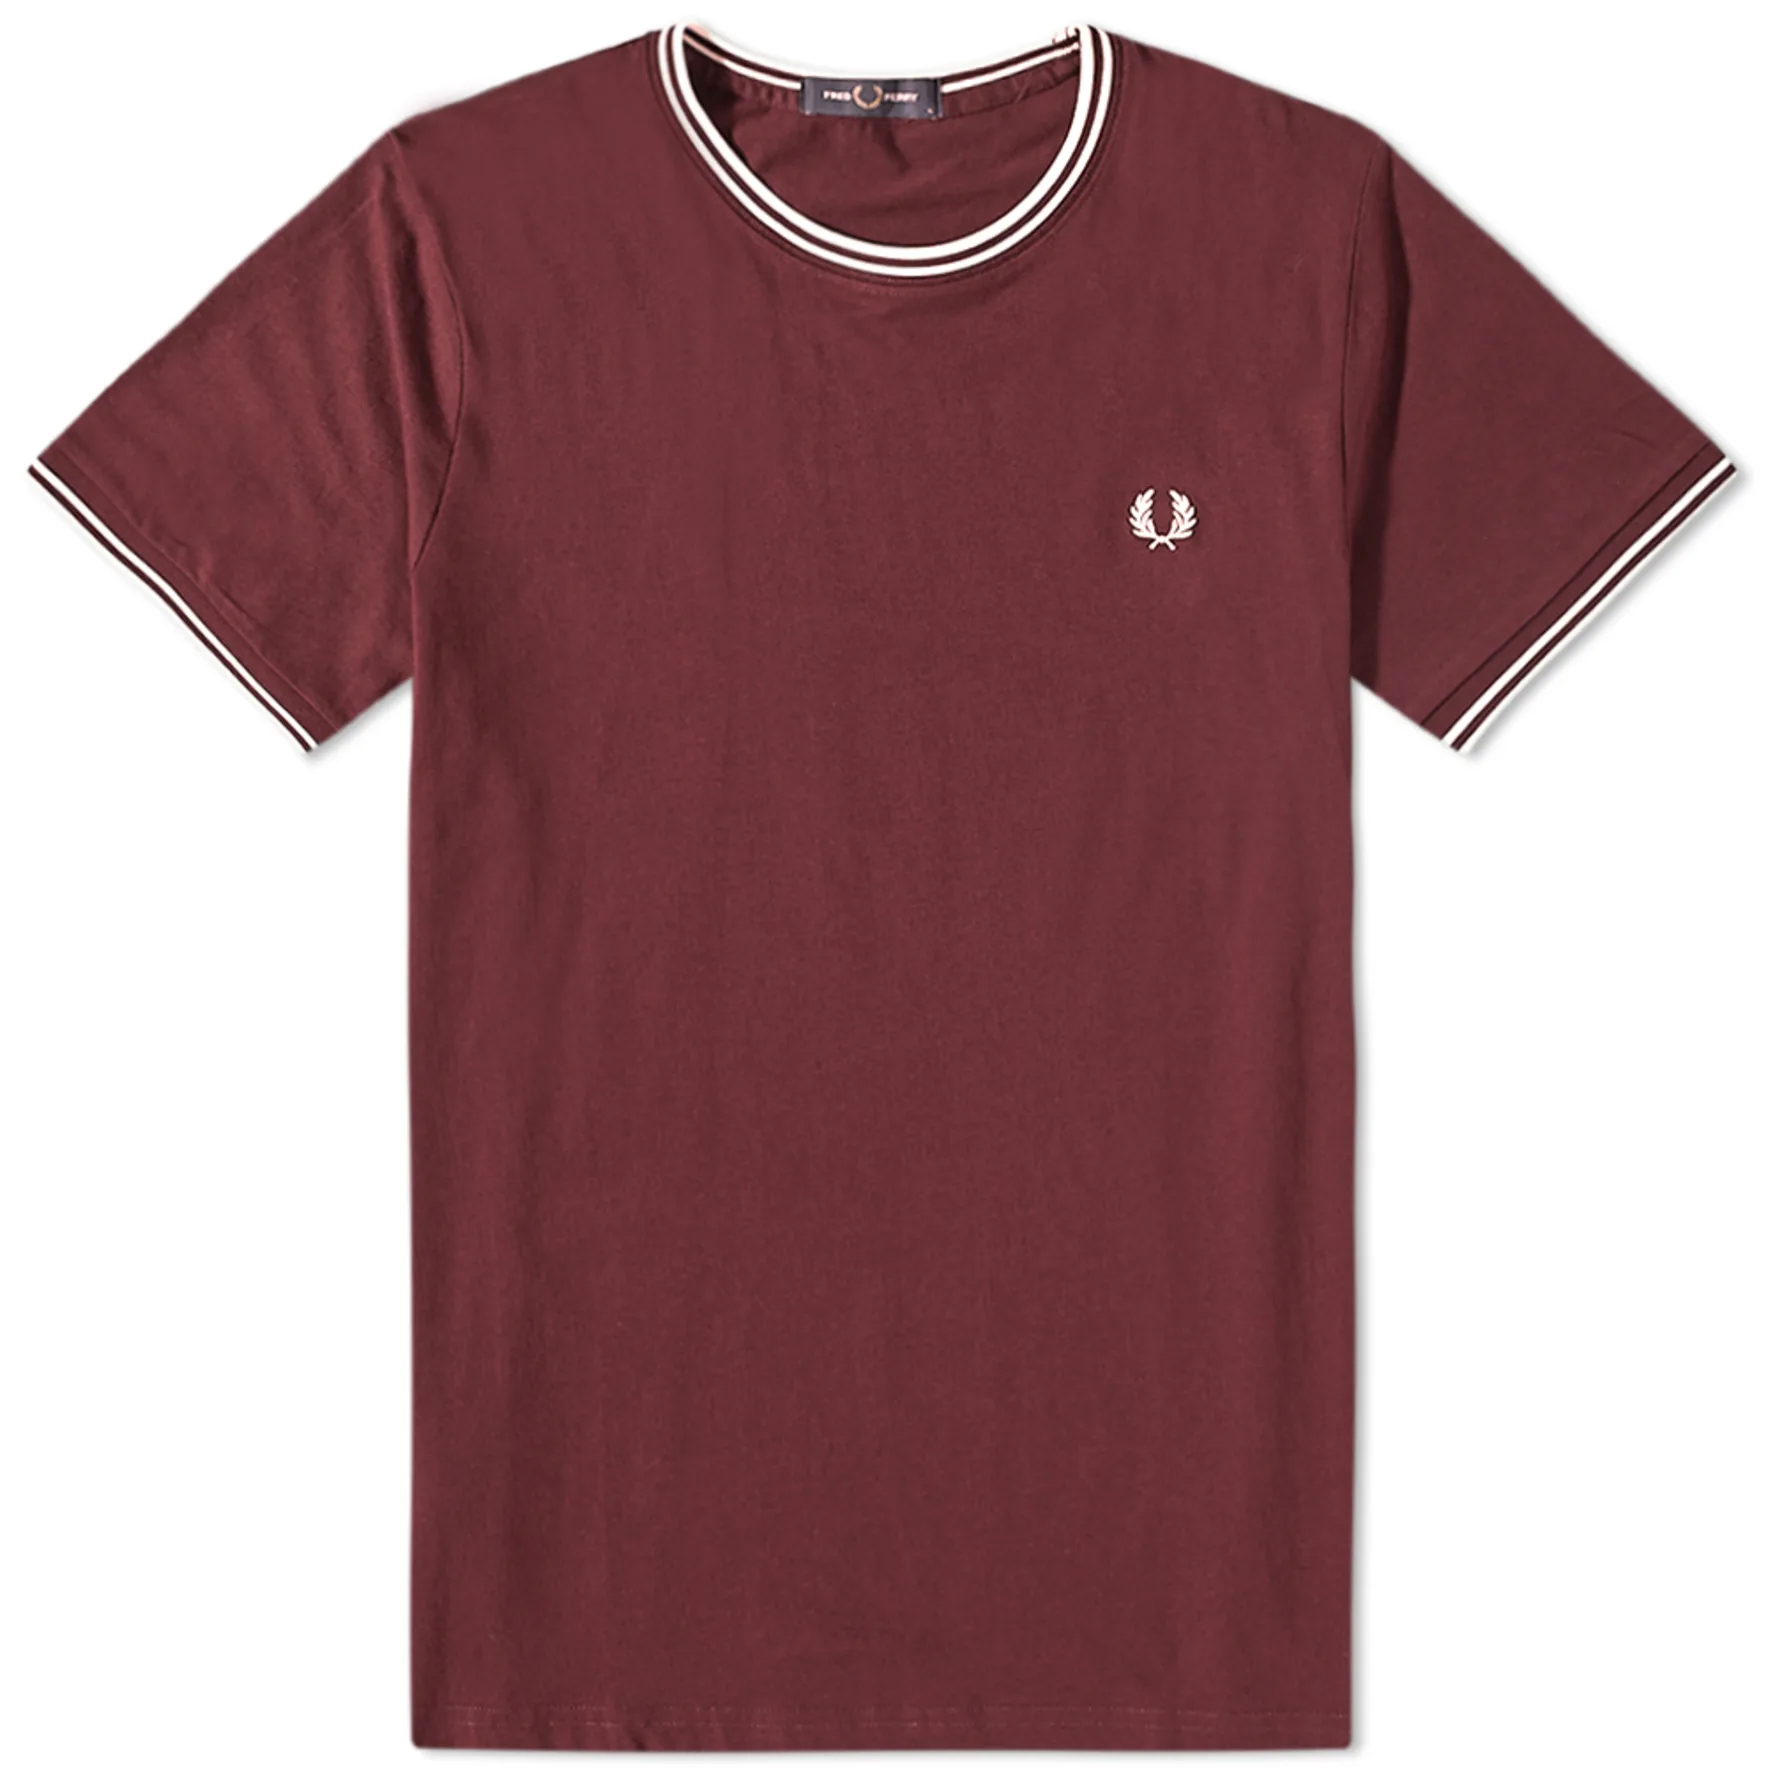 цена Футболка Fred Perry Authentic Twin Tipped, бордовый